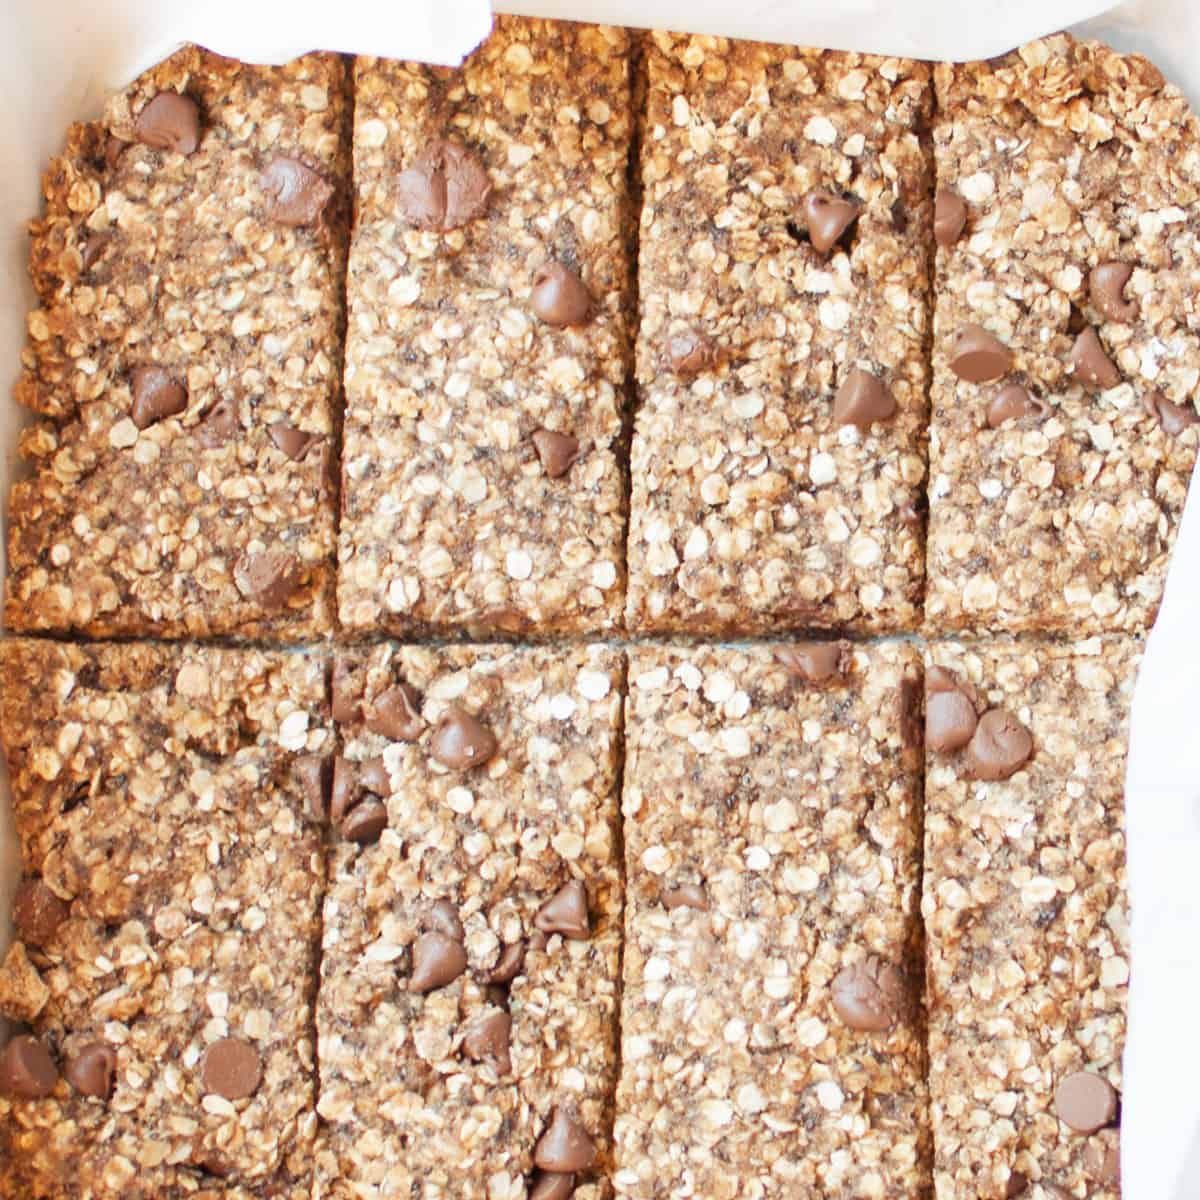 Oatmeal Chocolate Chip Breakfast Bars cut into rectangles